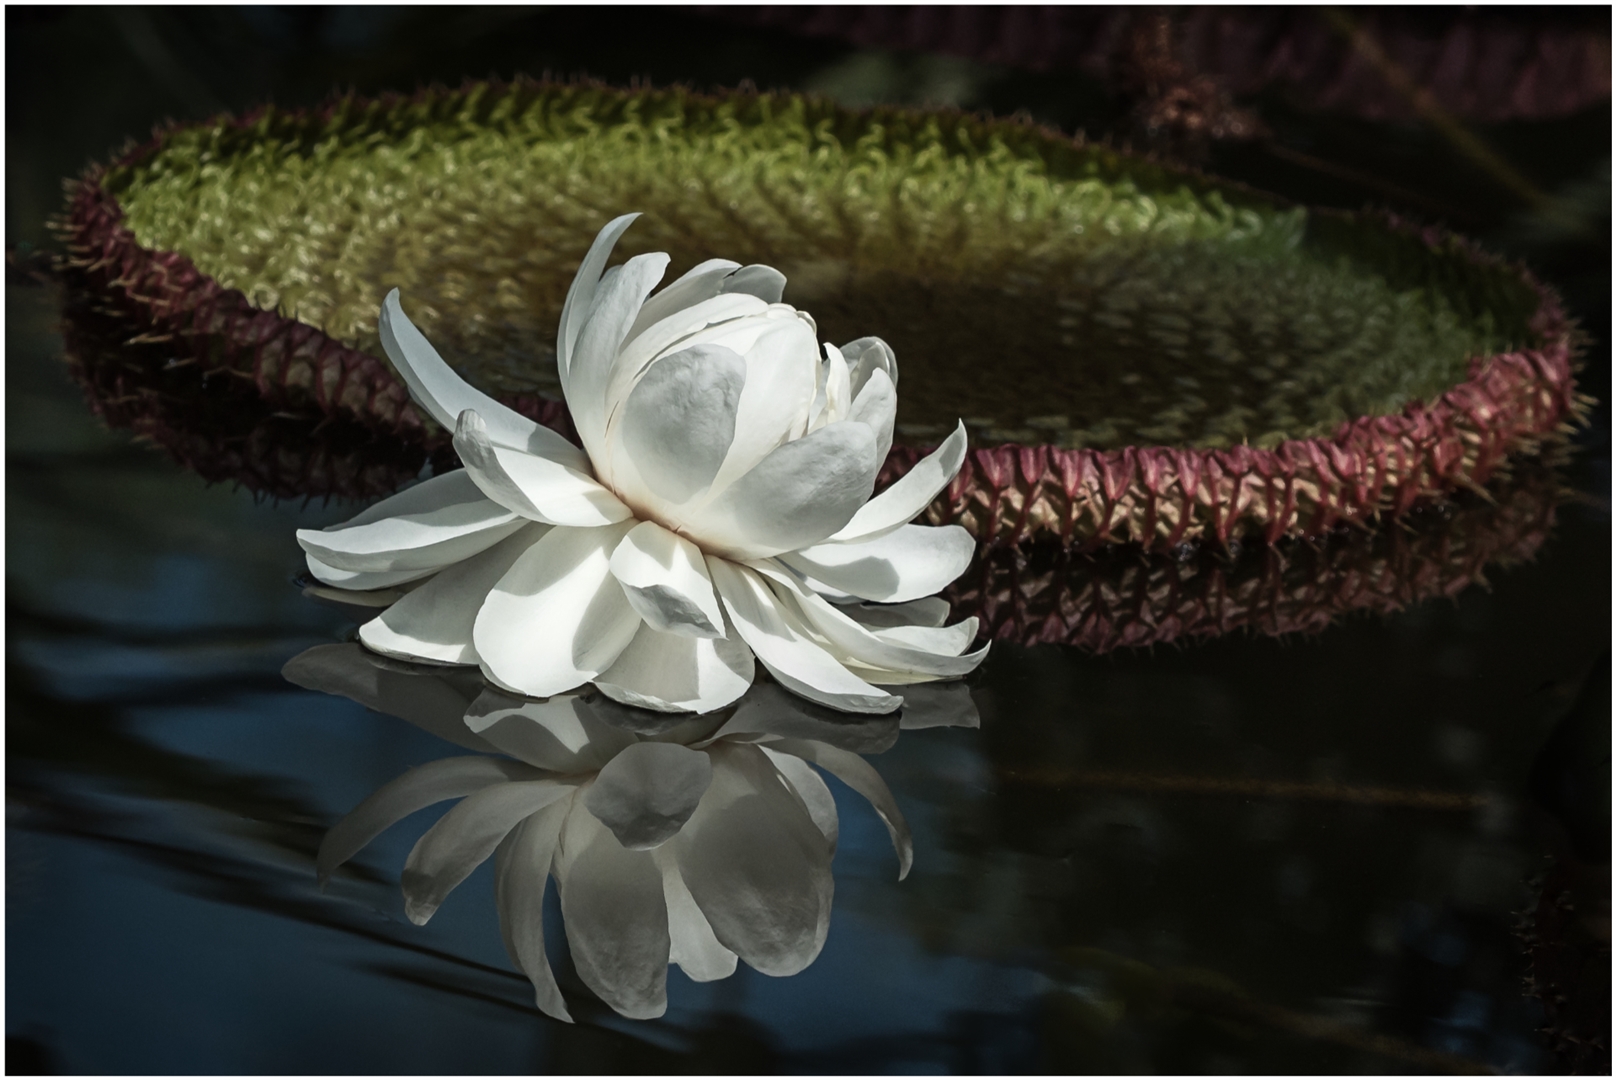 Fred Tiong Amazon Water Lily 10 Botanical, February 2018